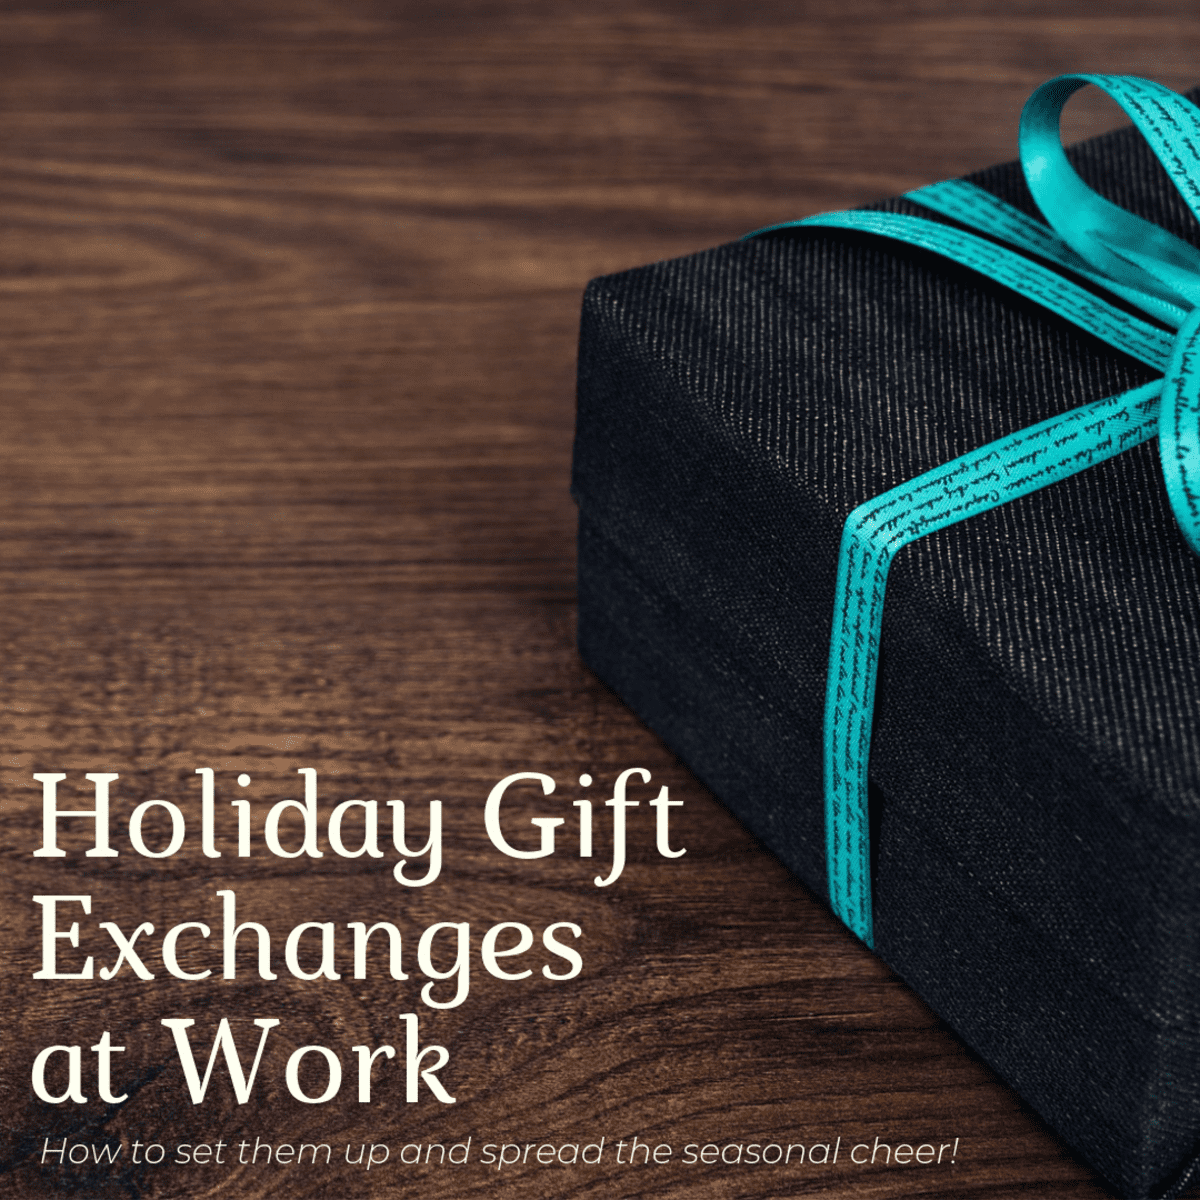 32 Unique Office Gifts: Gifts for Coworkers | Uncommon Goods